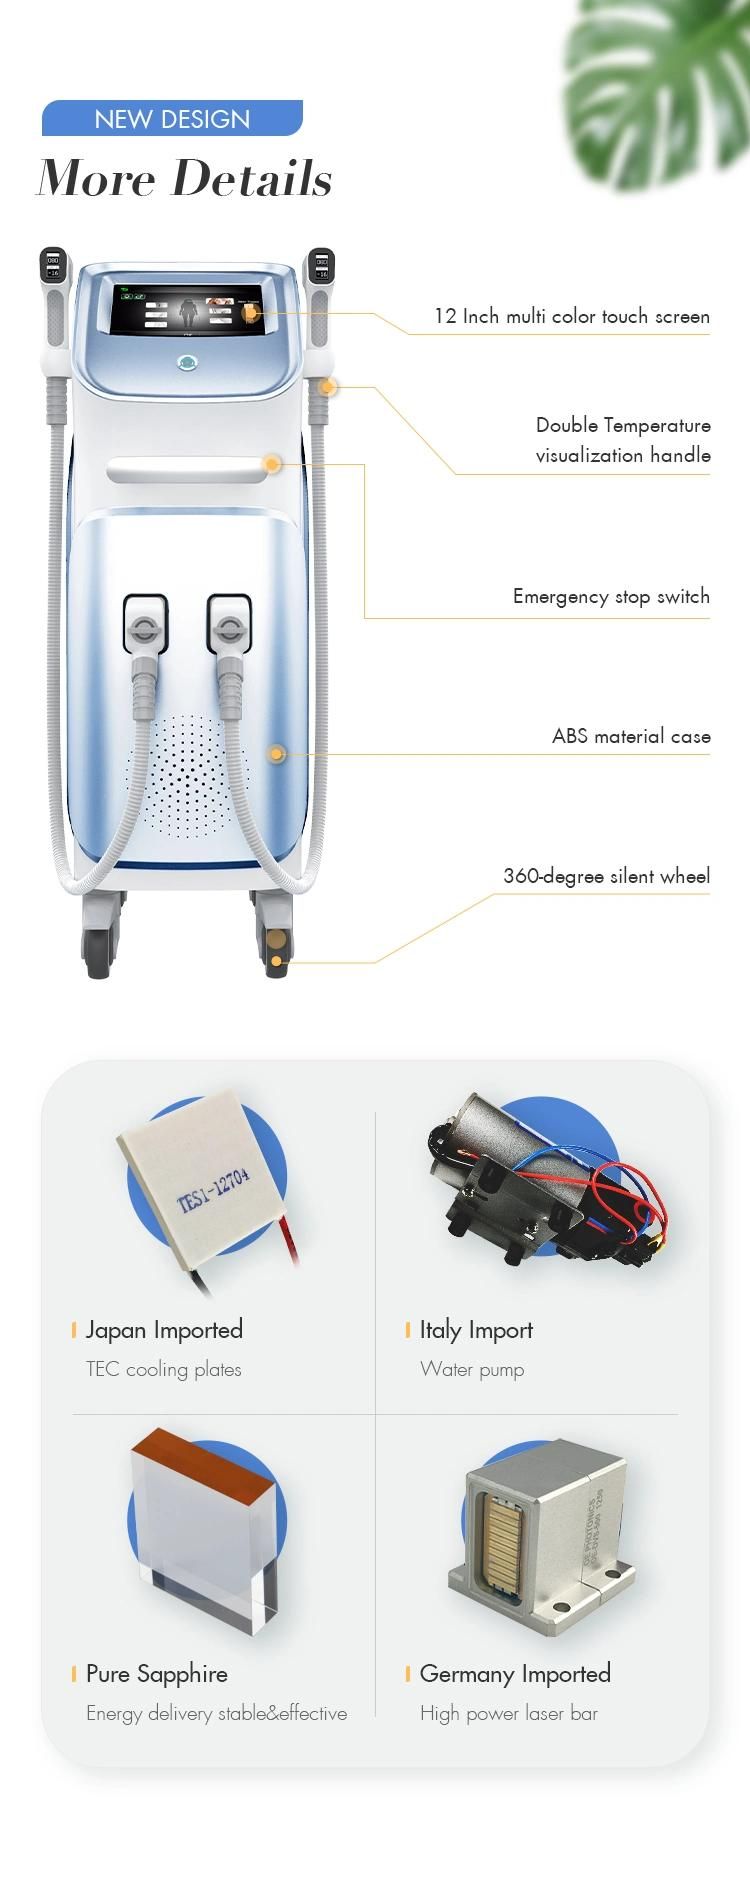 808nm Hair Removal Machine for Beauty Salon Double Handle